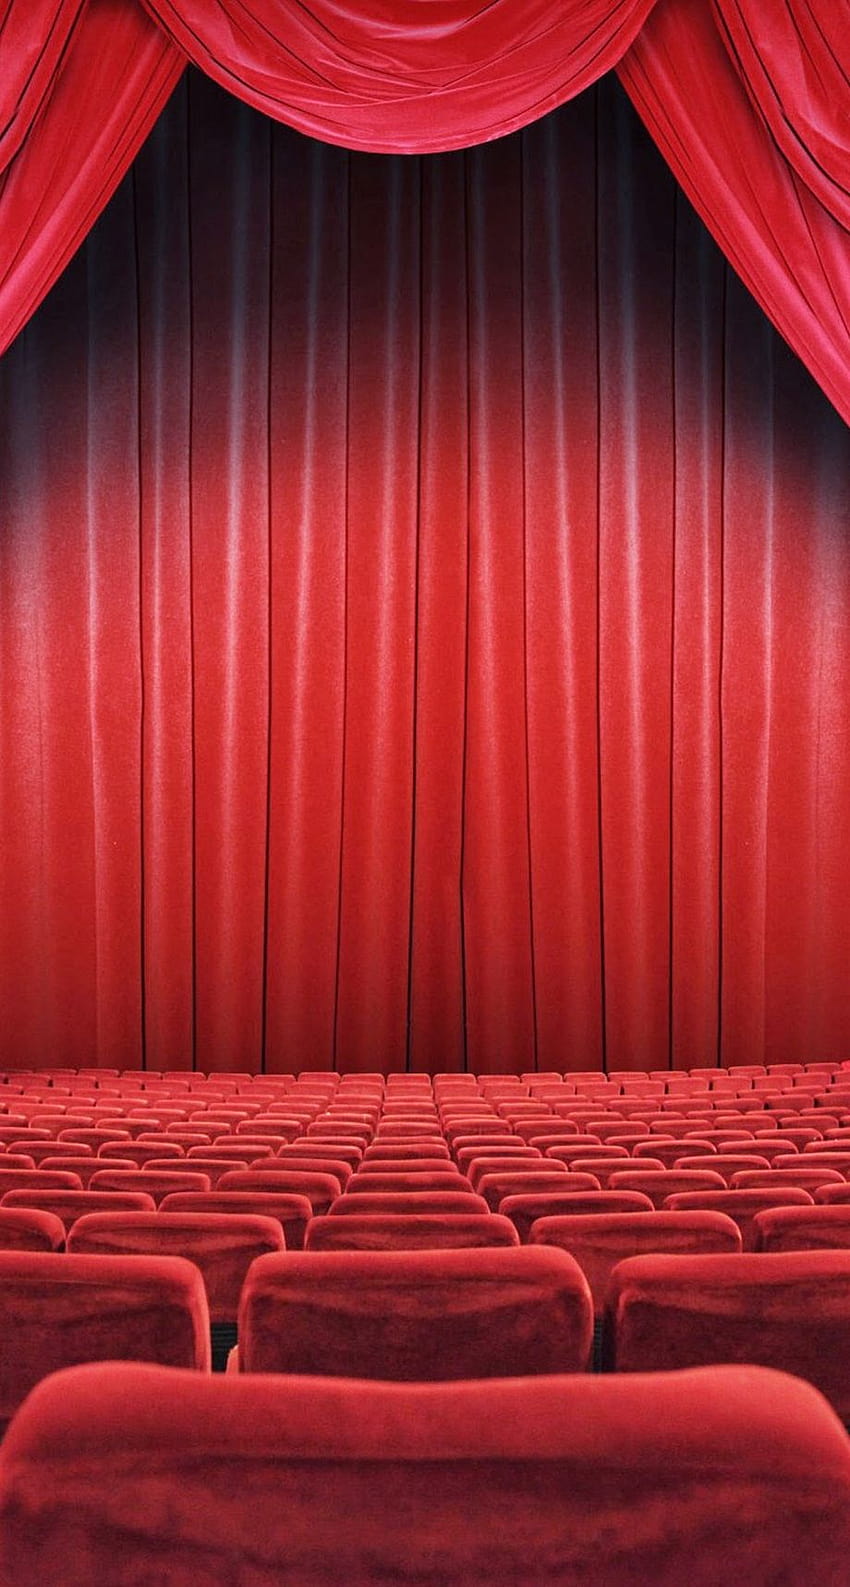 Theatre Seats Red Curtain for Phoned HD phone wallpaper